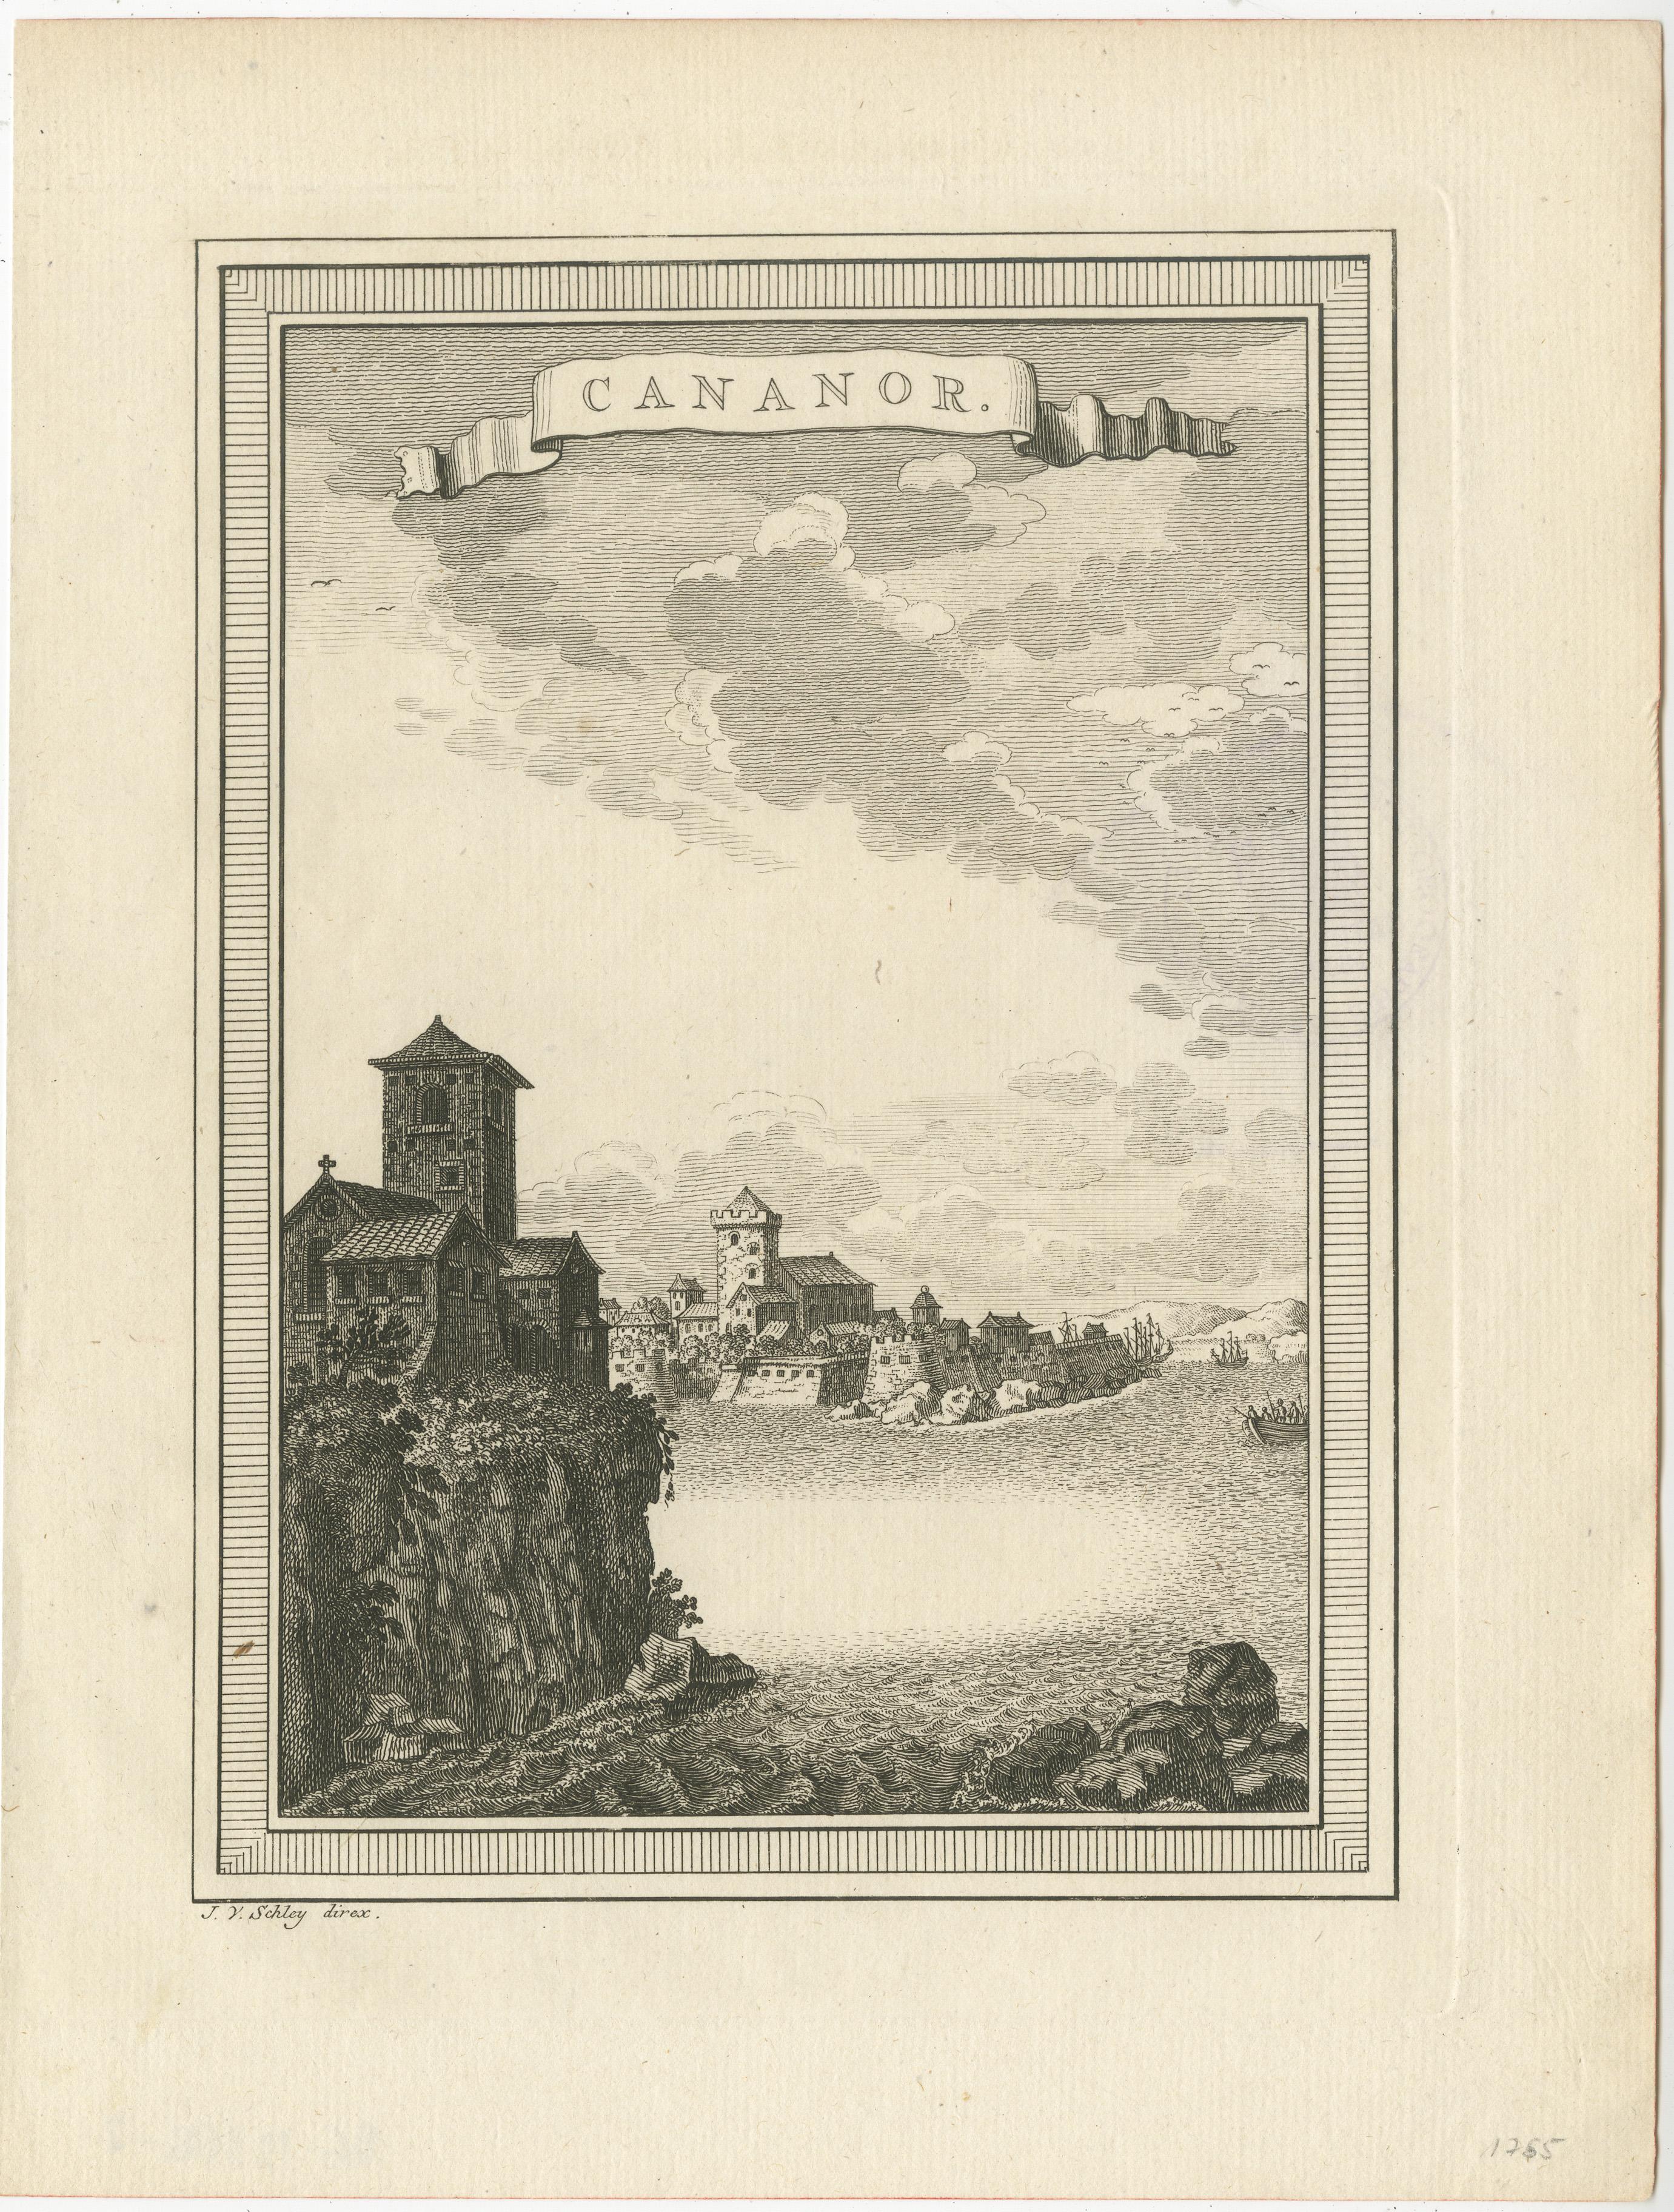 Antique print titled 'Cananor'. Original old print with a view of Kannur, Kerala, India. Formerly known in English as Cannanore. Originates from a Dutch edition of 'Histoire générale des voyages' by Antoine-François Prévost.

Engraved by J. van